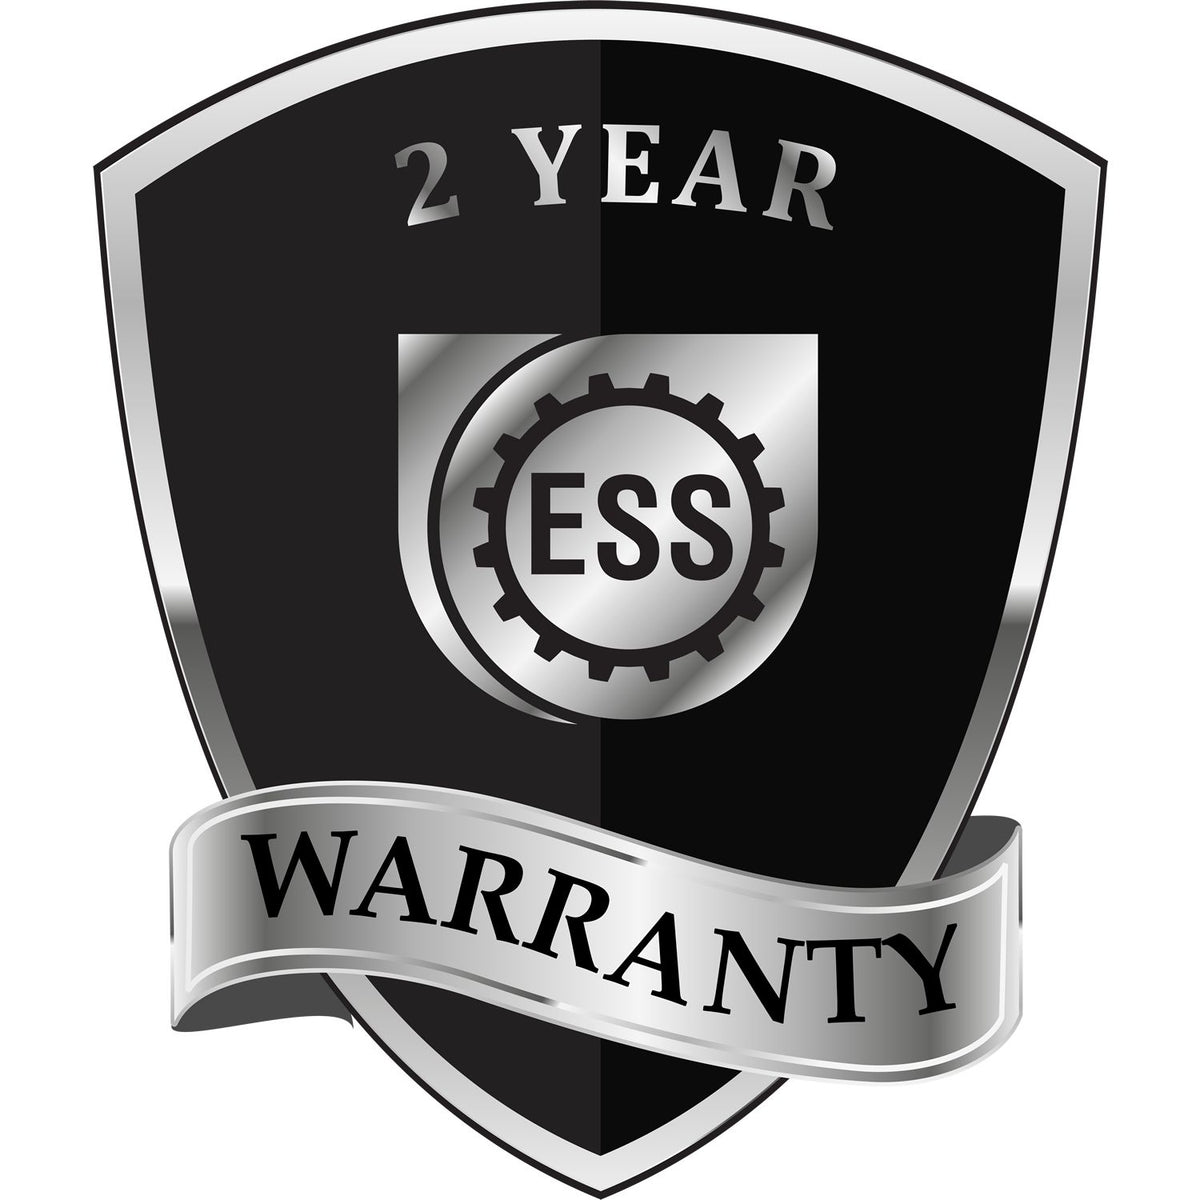 A black and silver badge or emblem showing warranty information for the Gift Maryland Engineer Seal